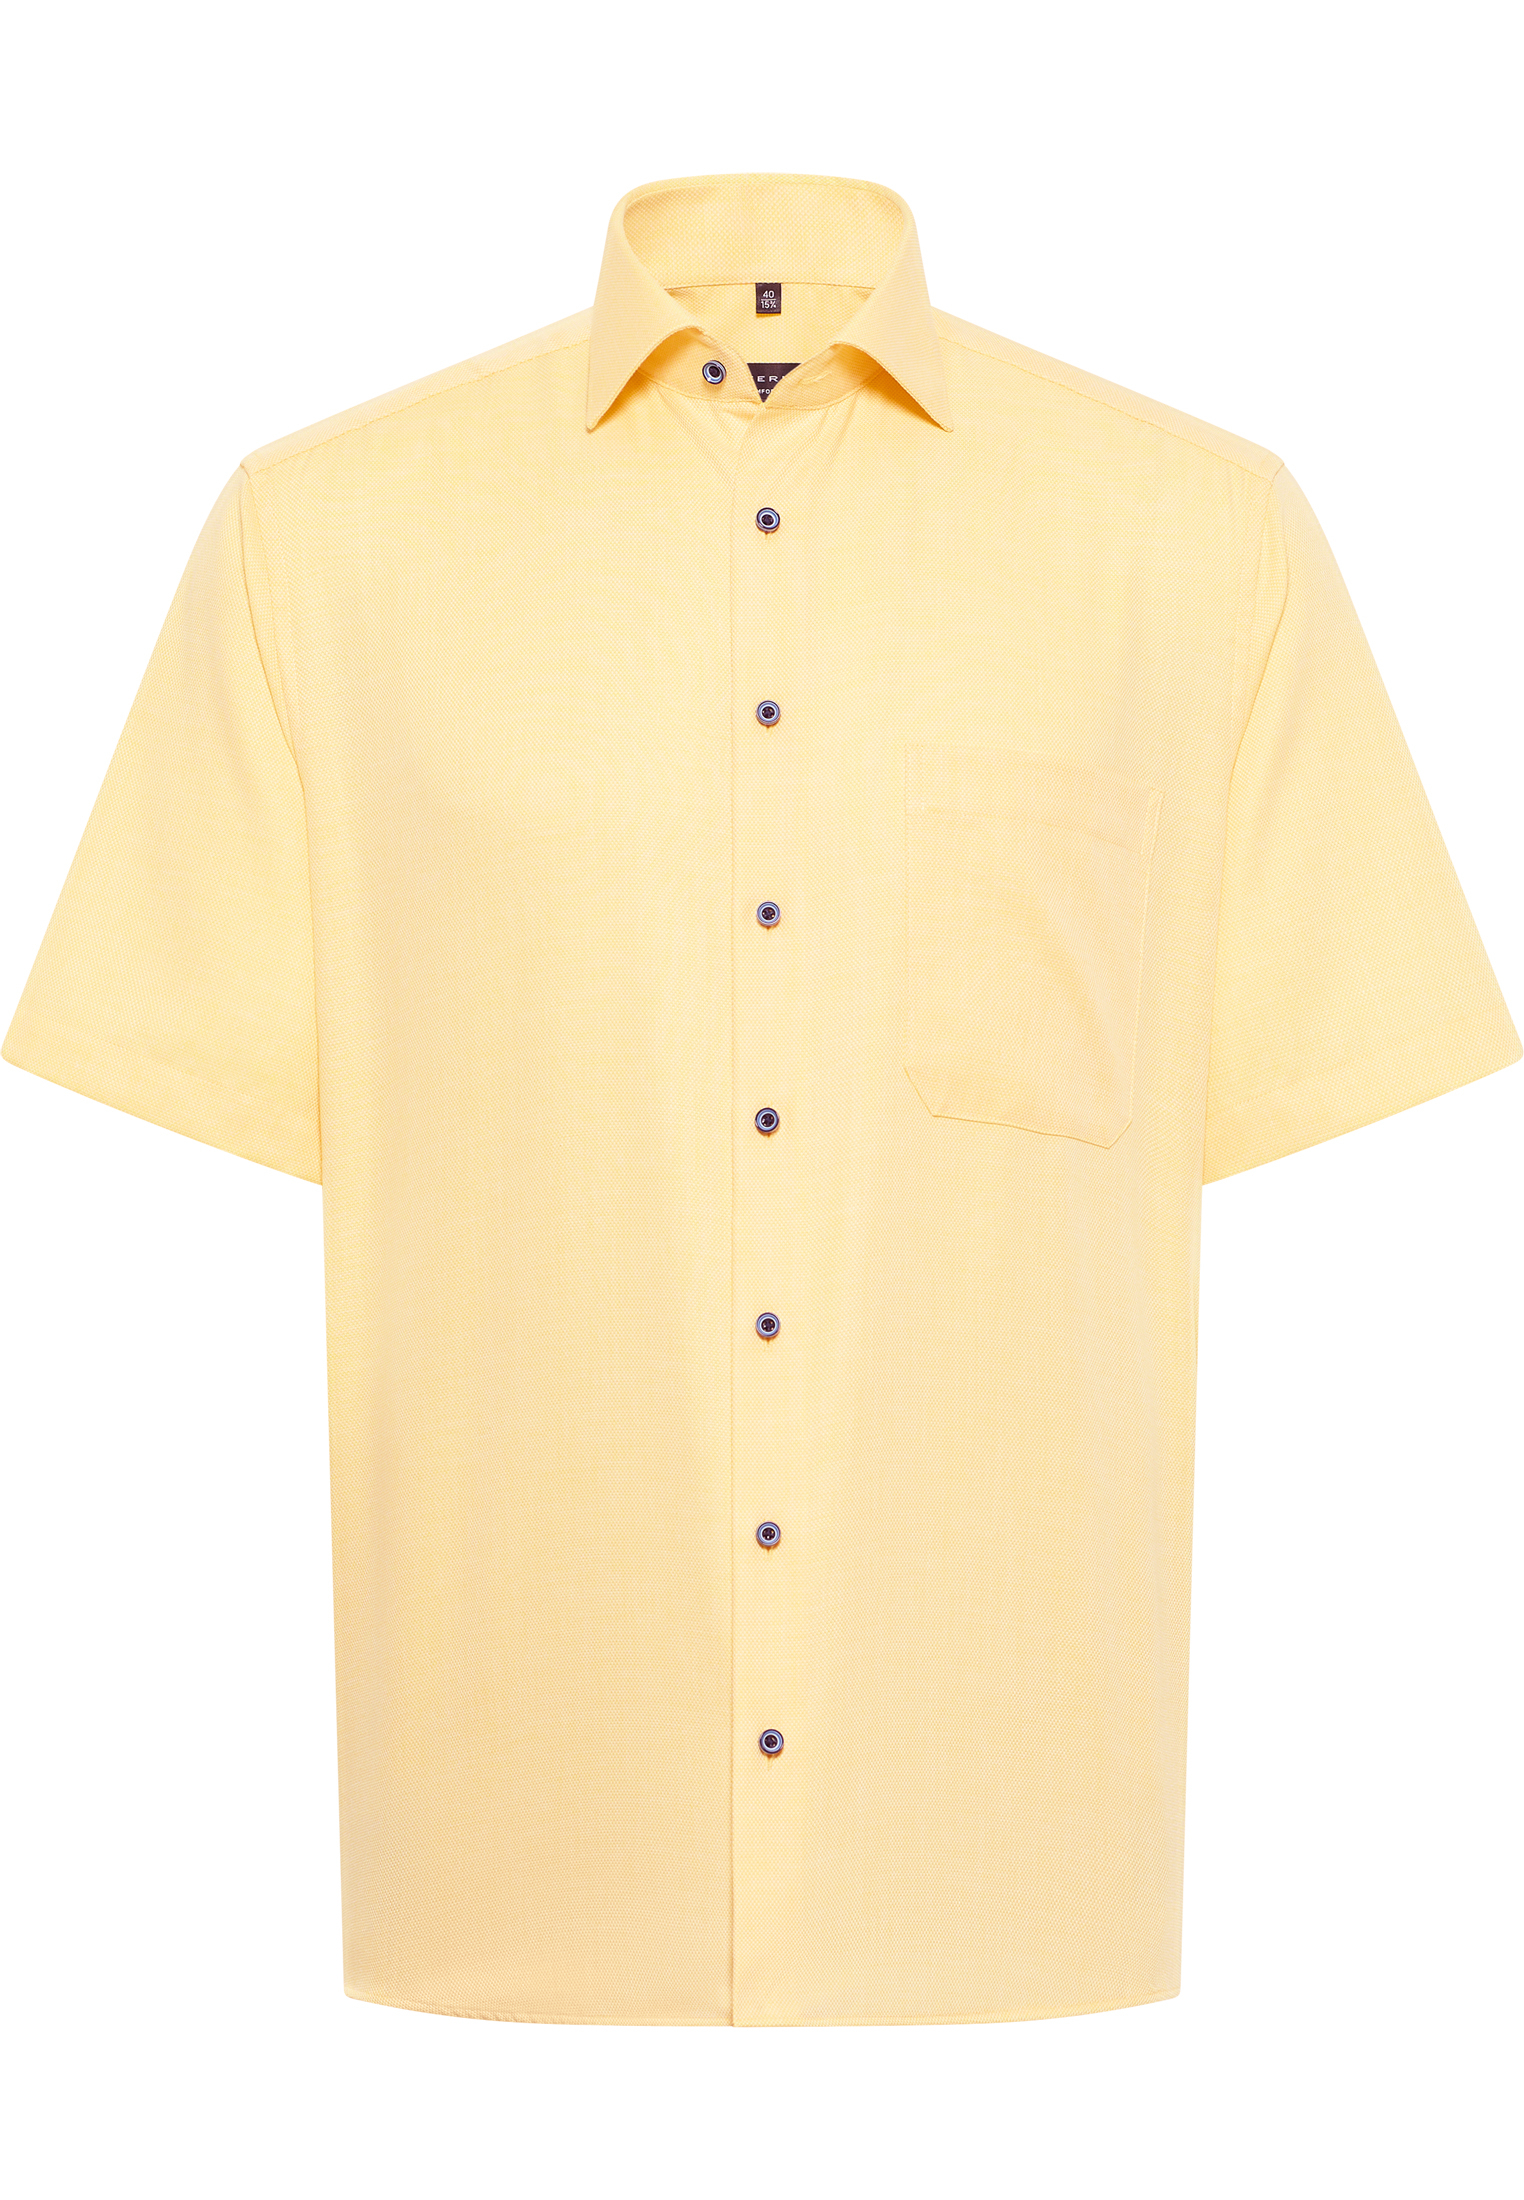 COMFORT FIT Shirt in yellow structured